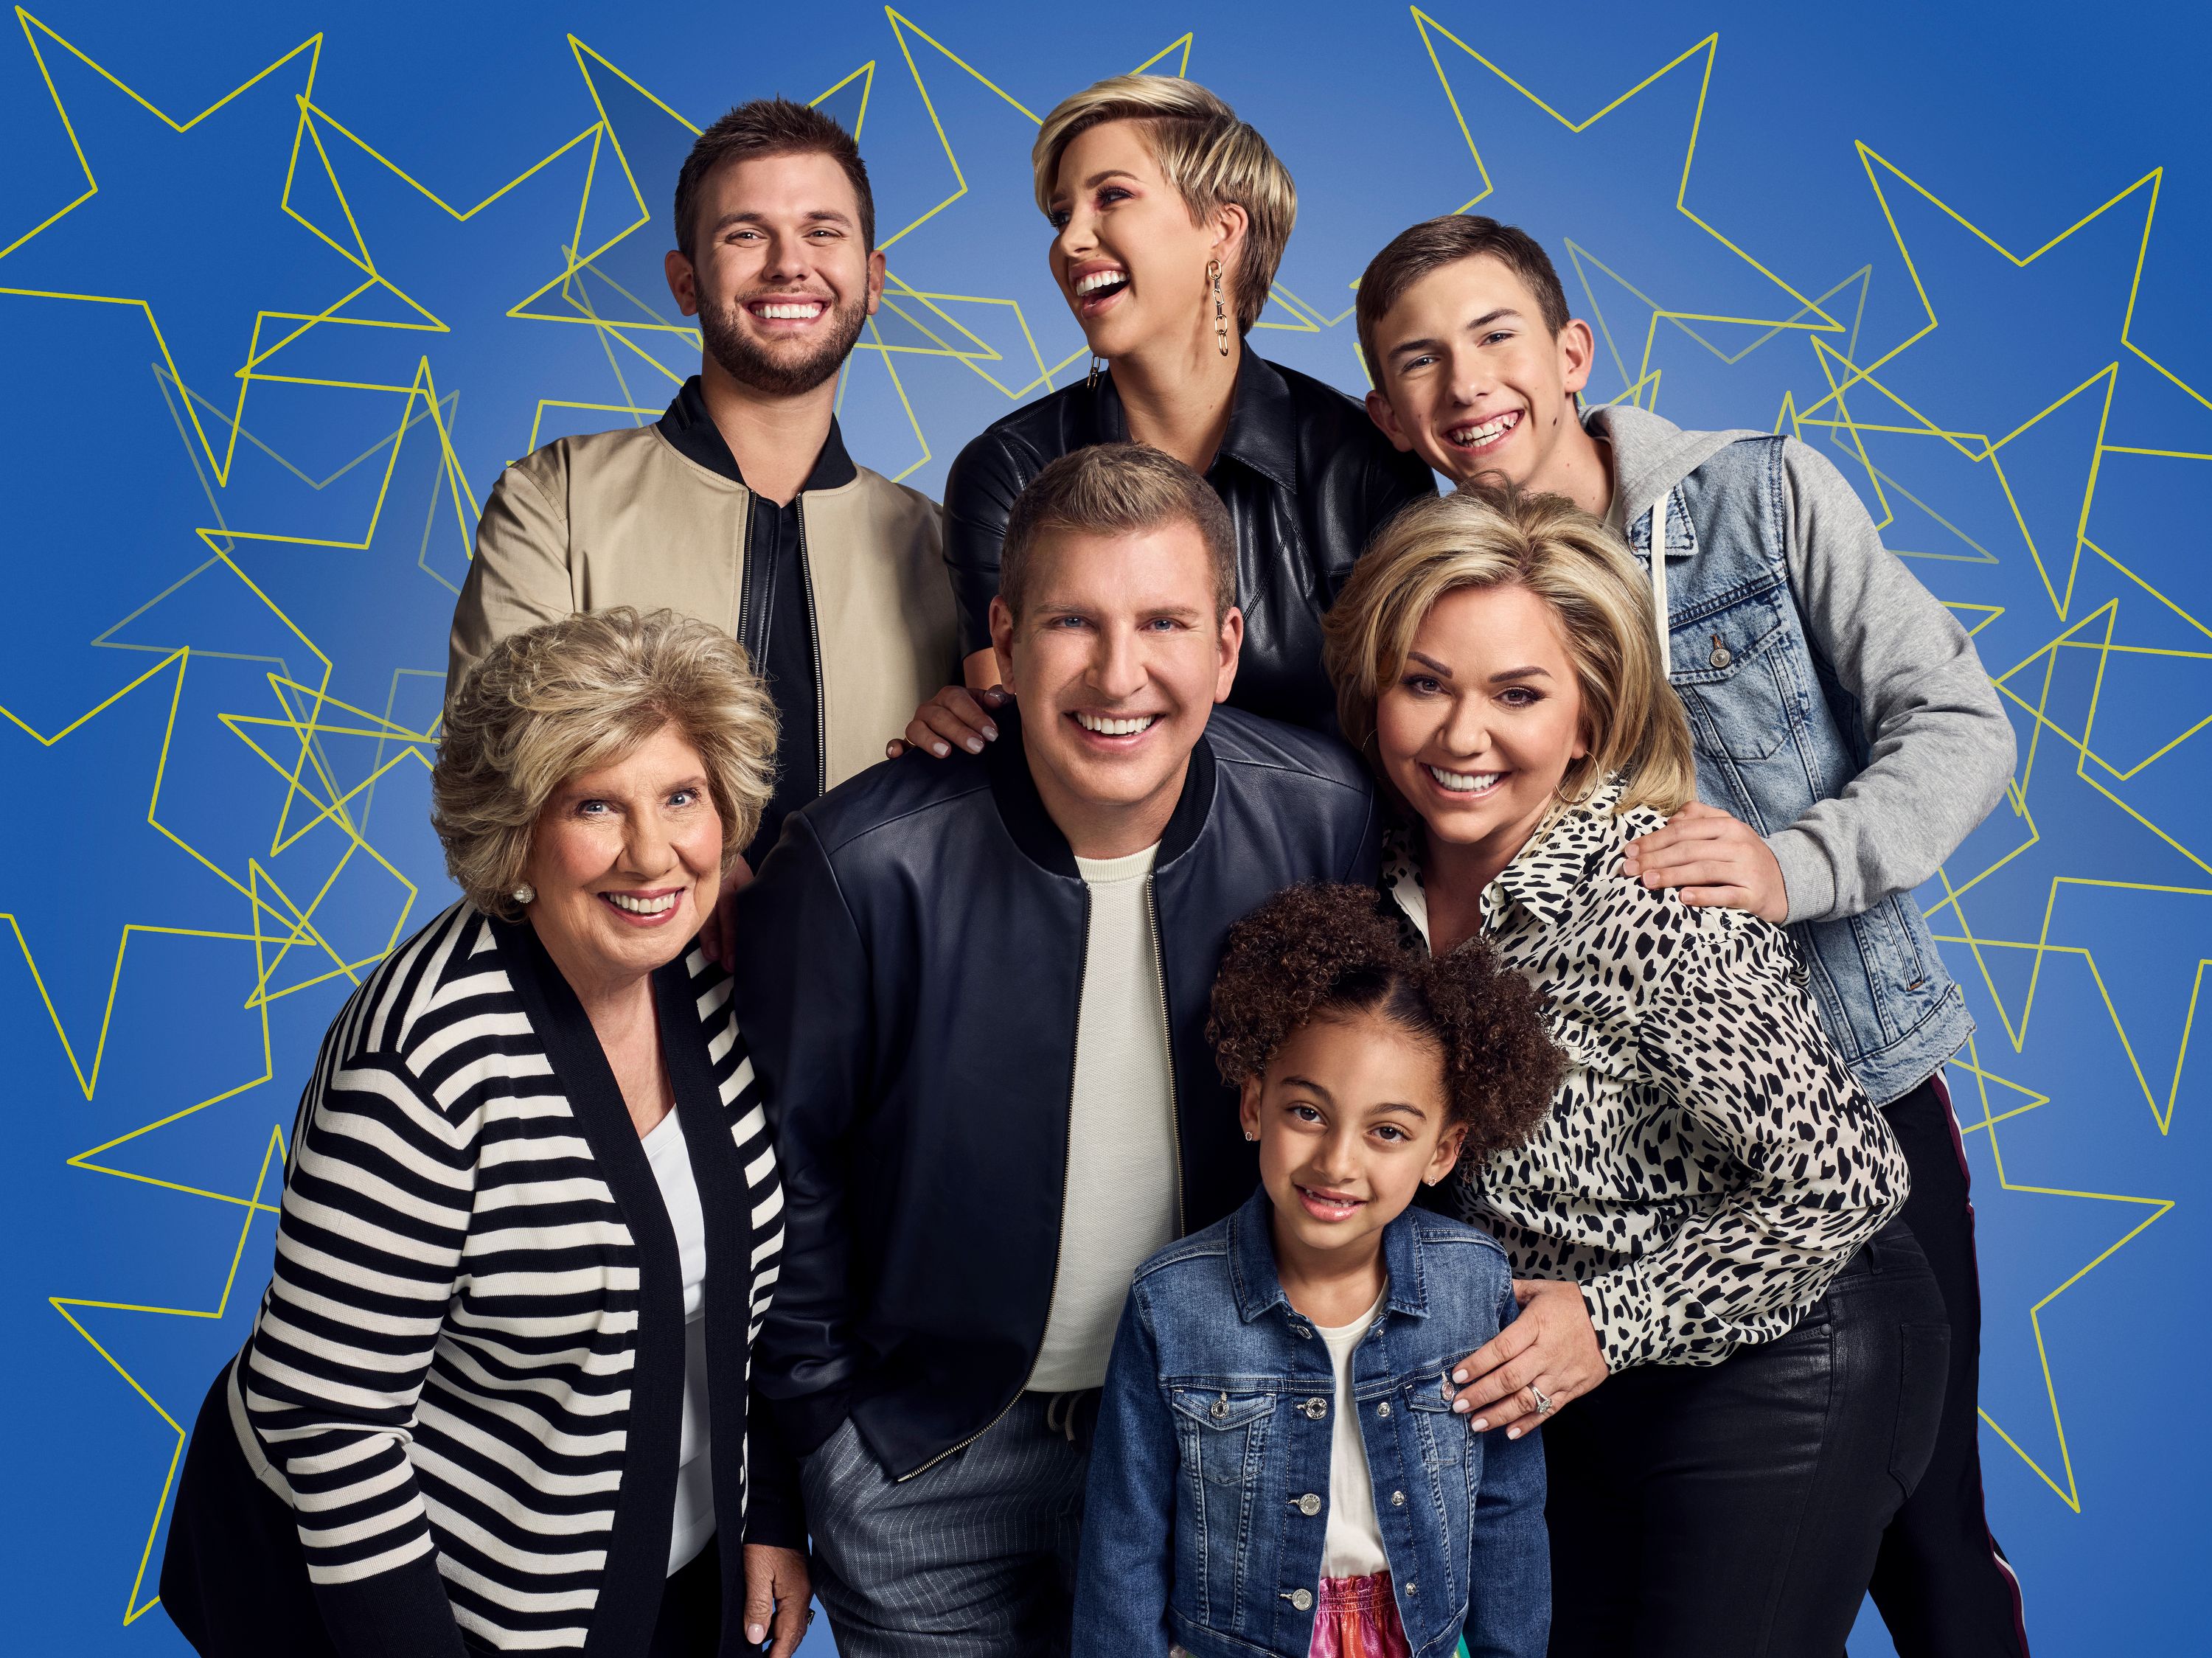 Faye, Chase, Todd, Savannah, Chloe, Julie, and Grayson Chrisley in a season 8 "Chrisley Knows Best" promo image | Photo: Getty Images